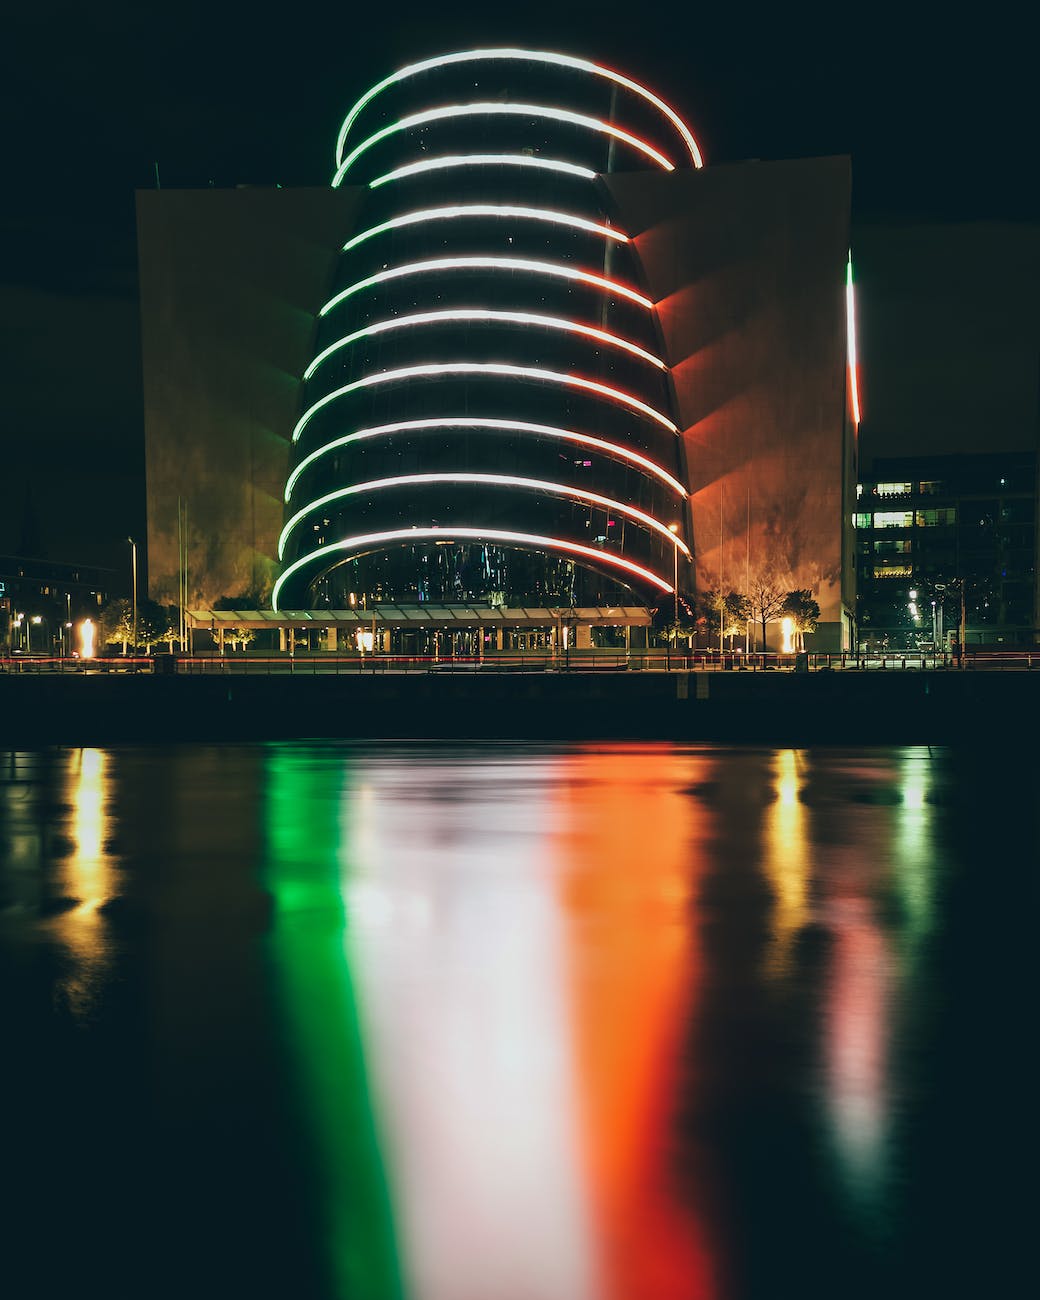 an illuminated building during night time